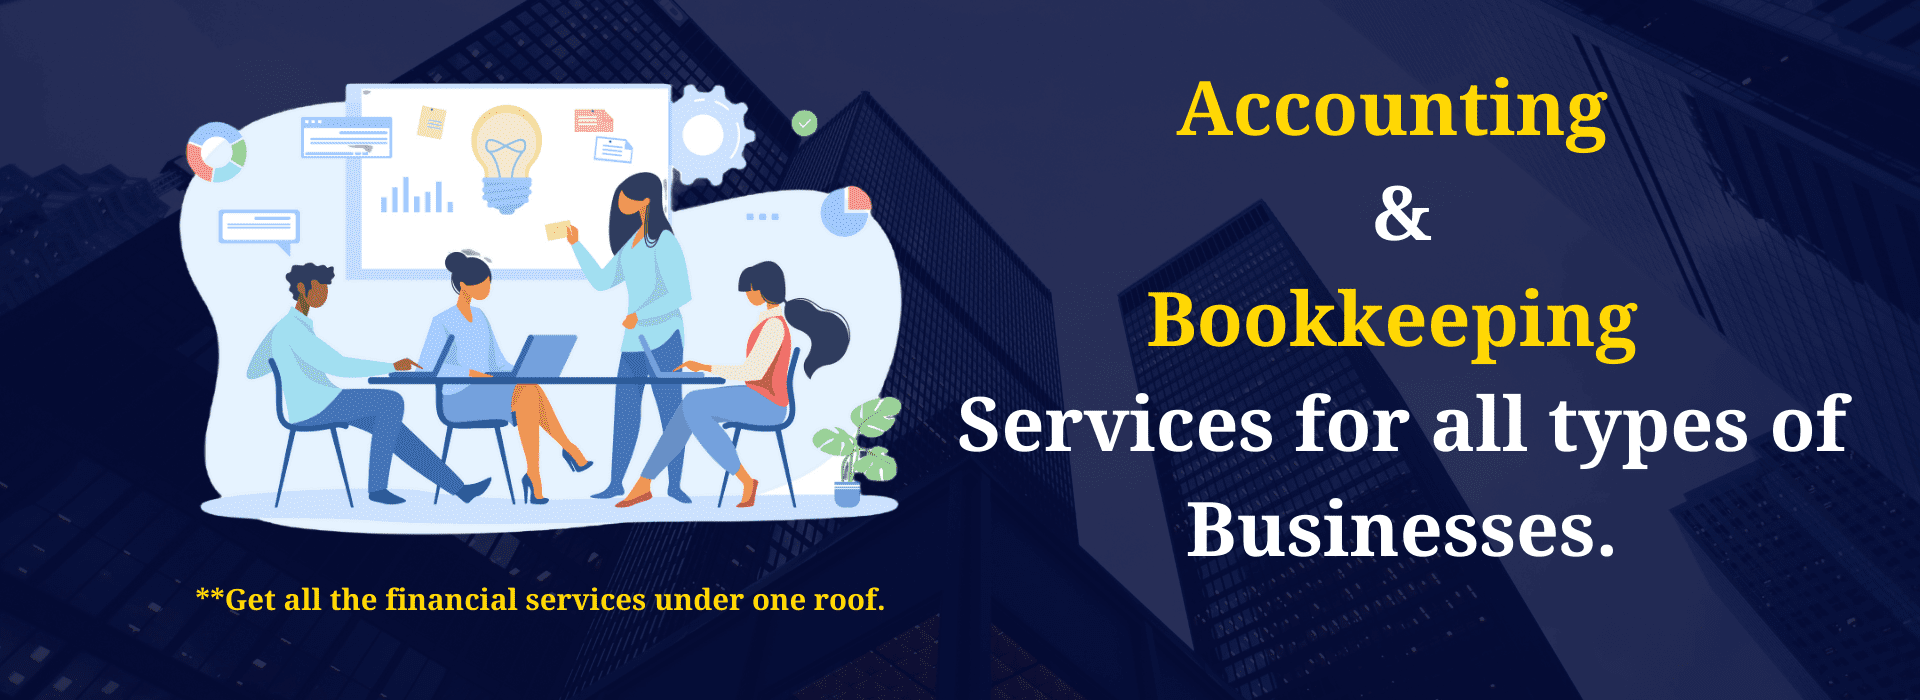 Accounting and bookkeeping services for all types of businesses